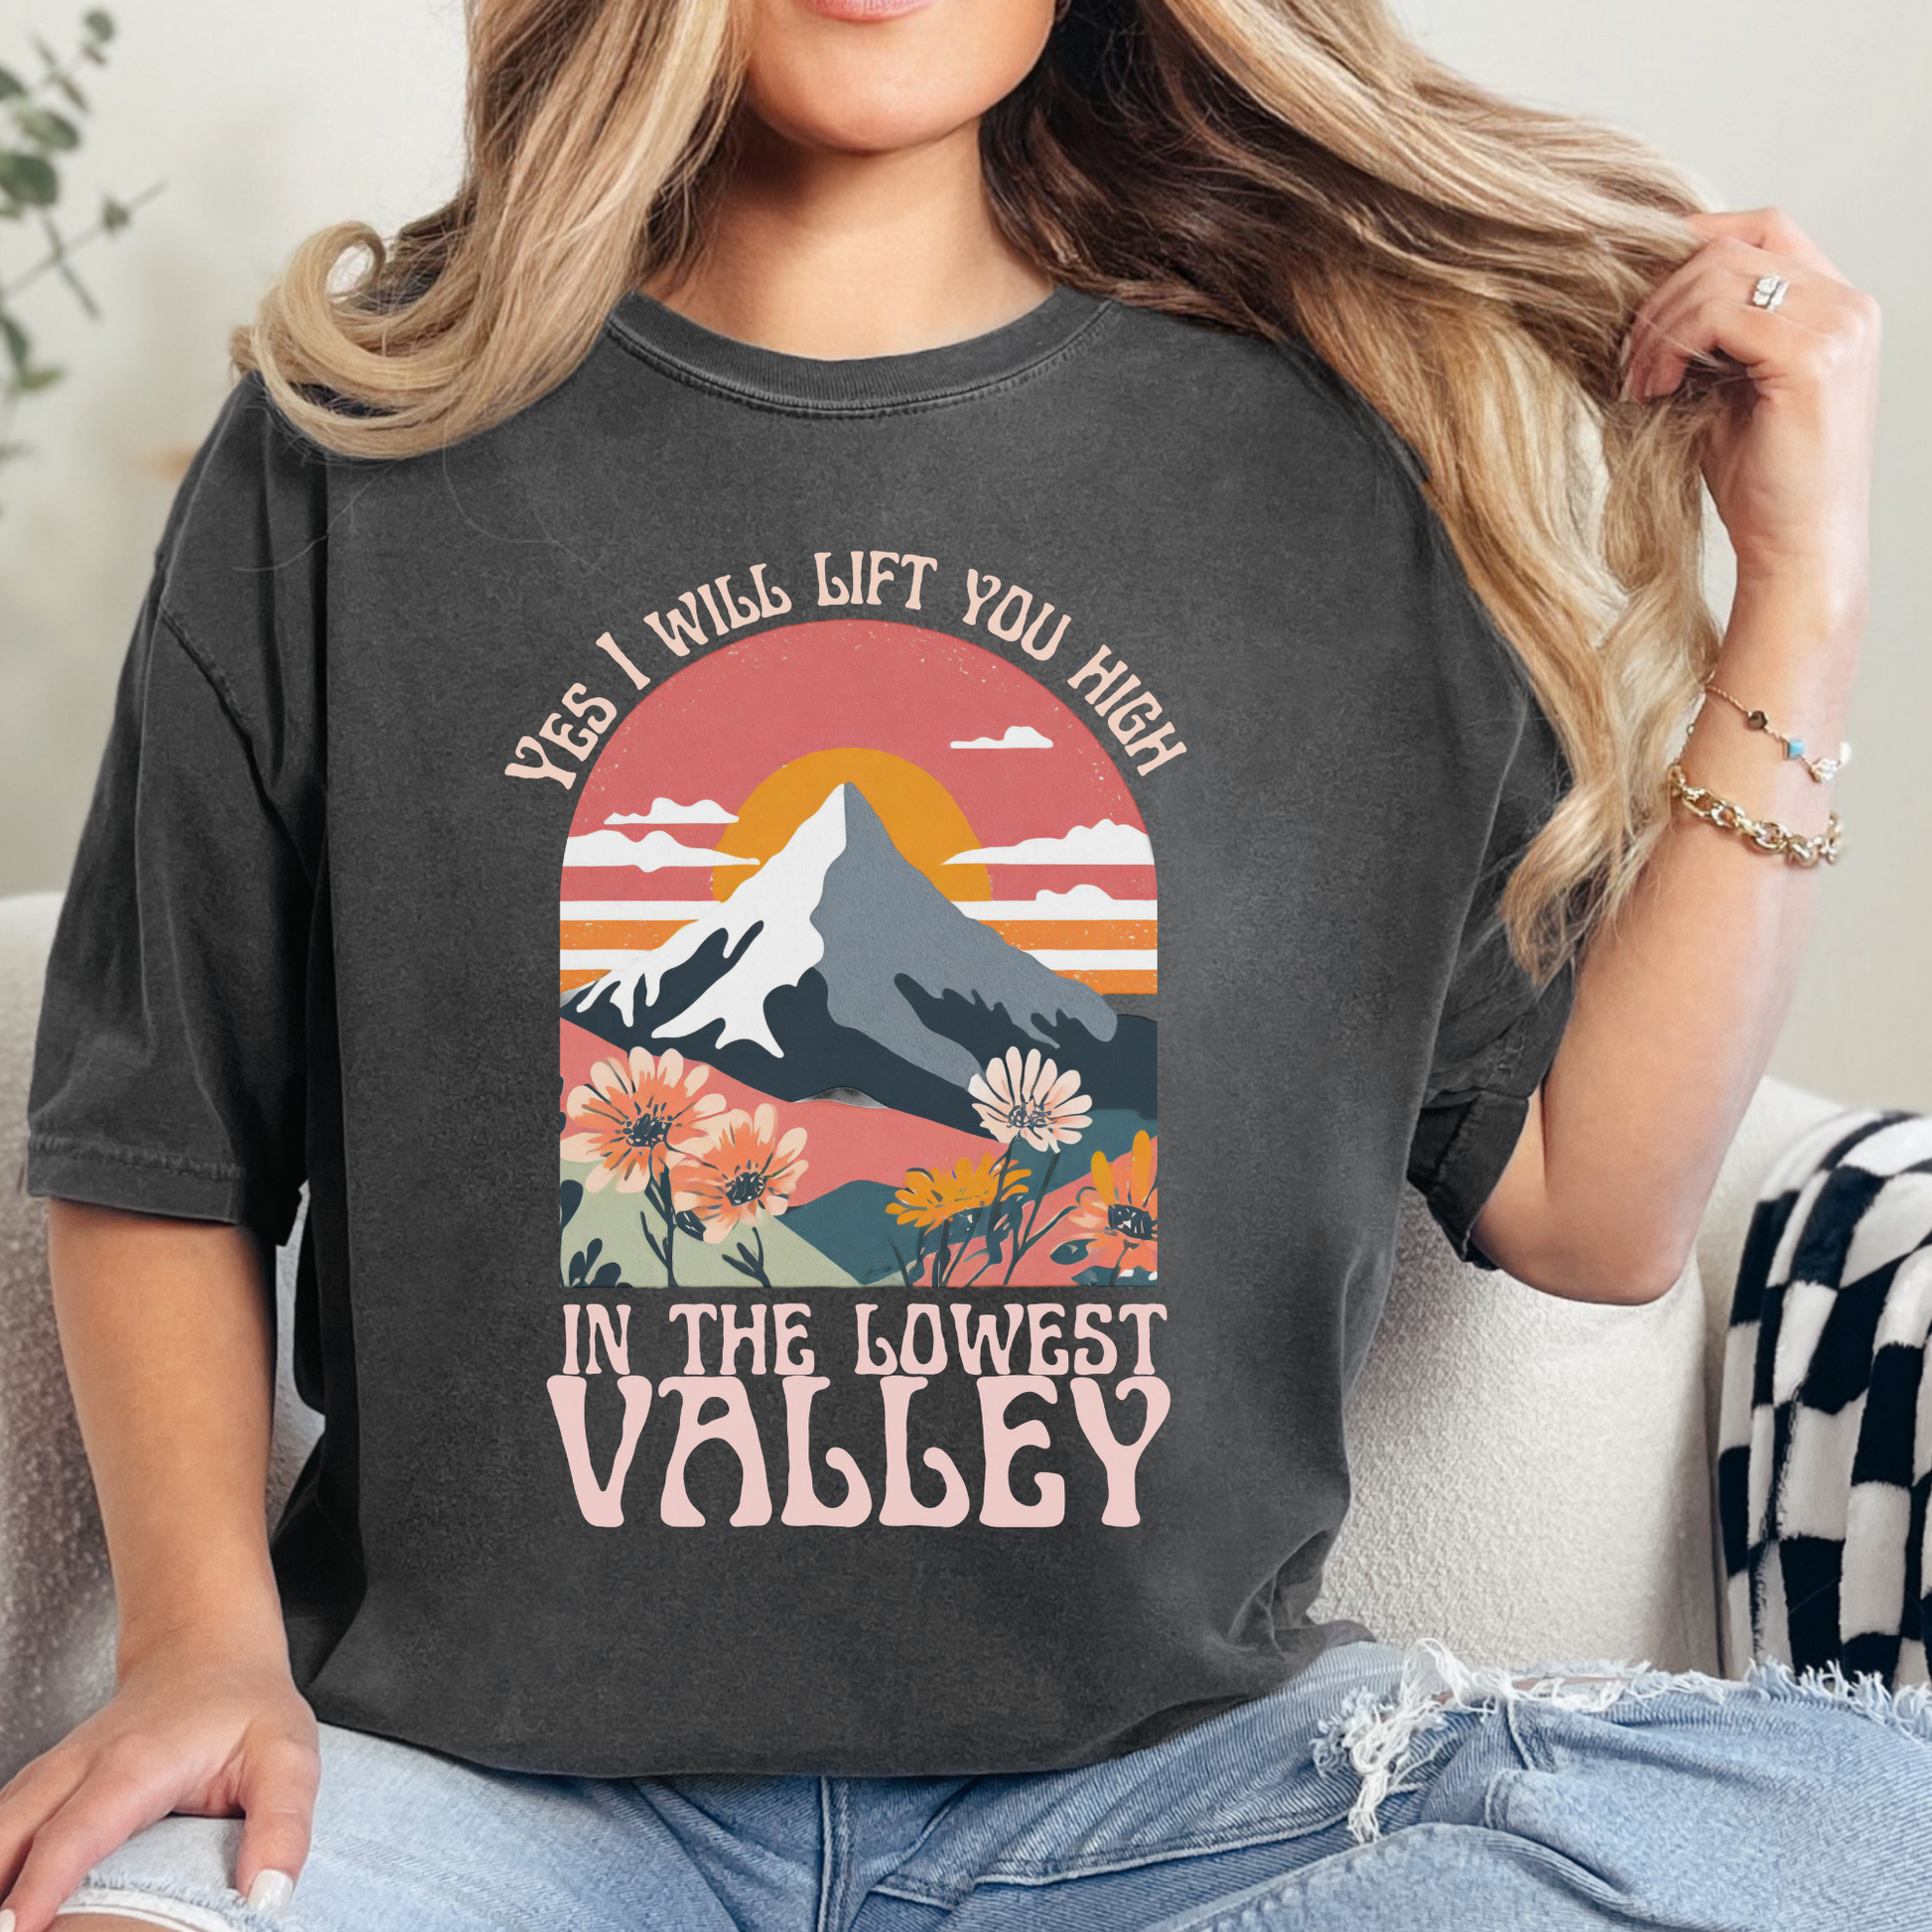 Yes I will lift you high in the lowest valley Christian T-Shirt. Printed on a Comfort Colors pepper t-shirt